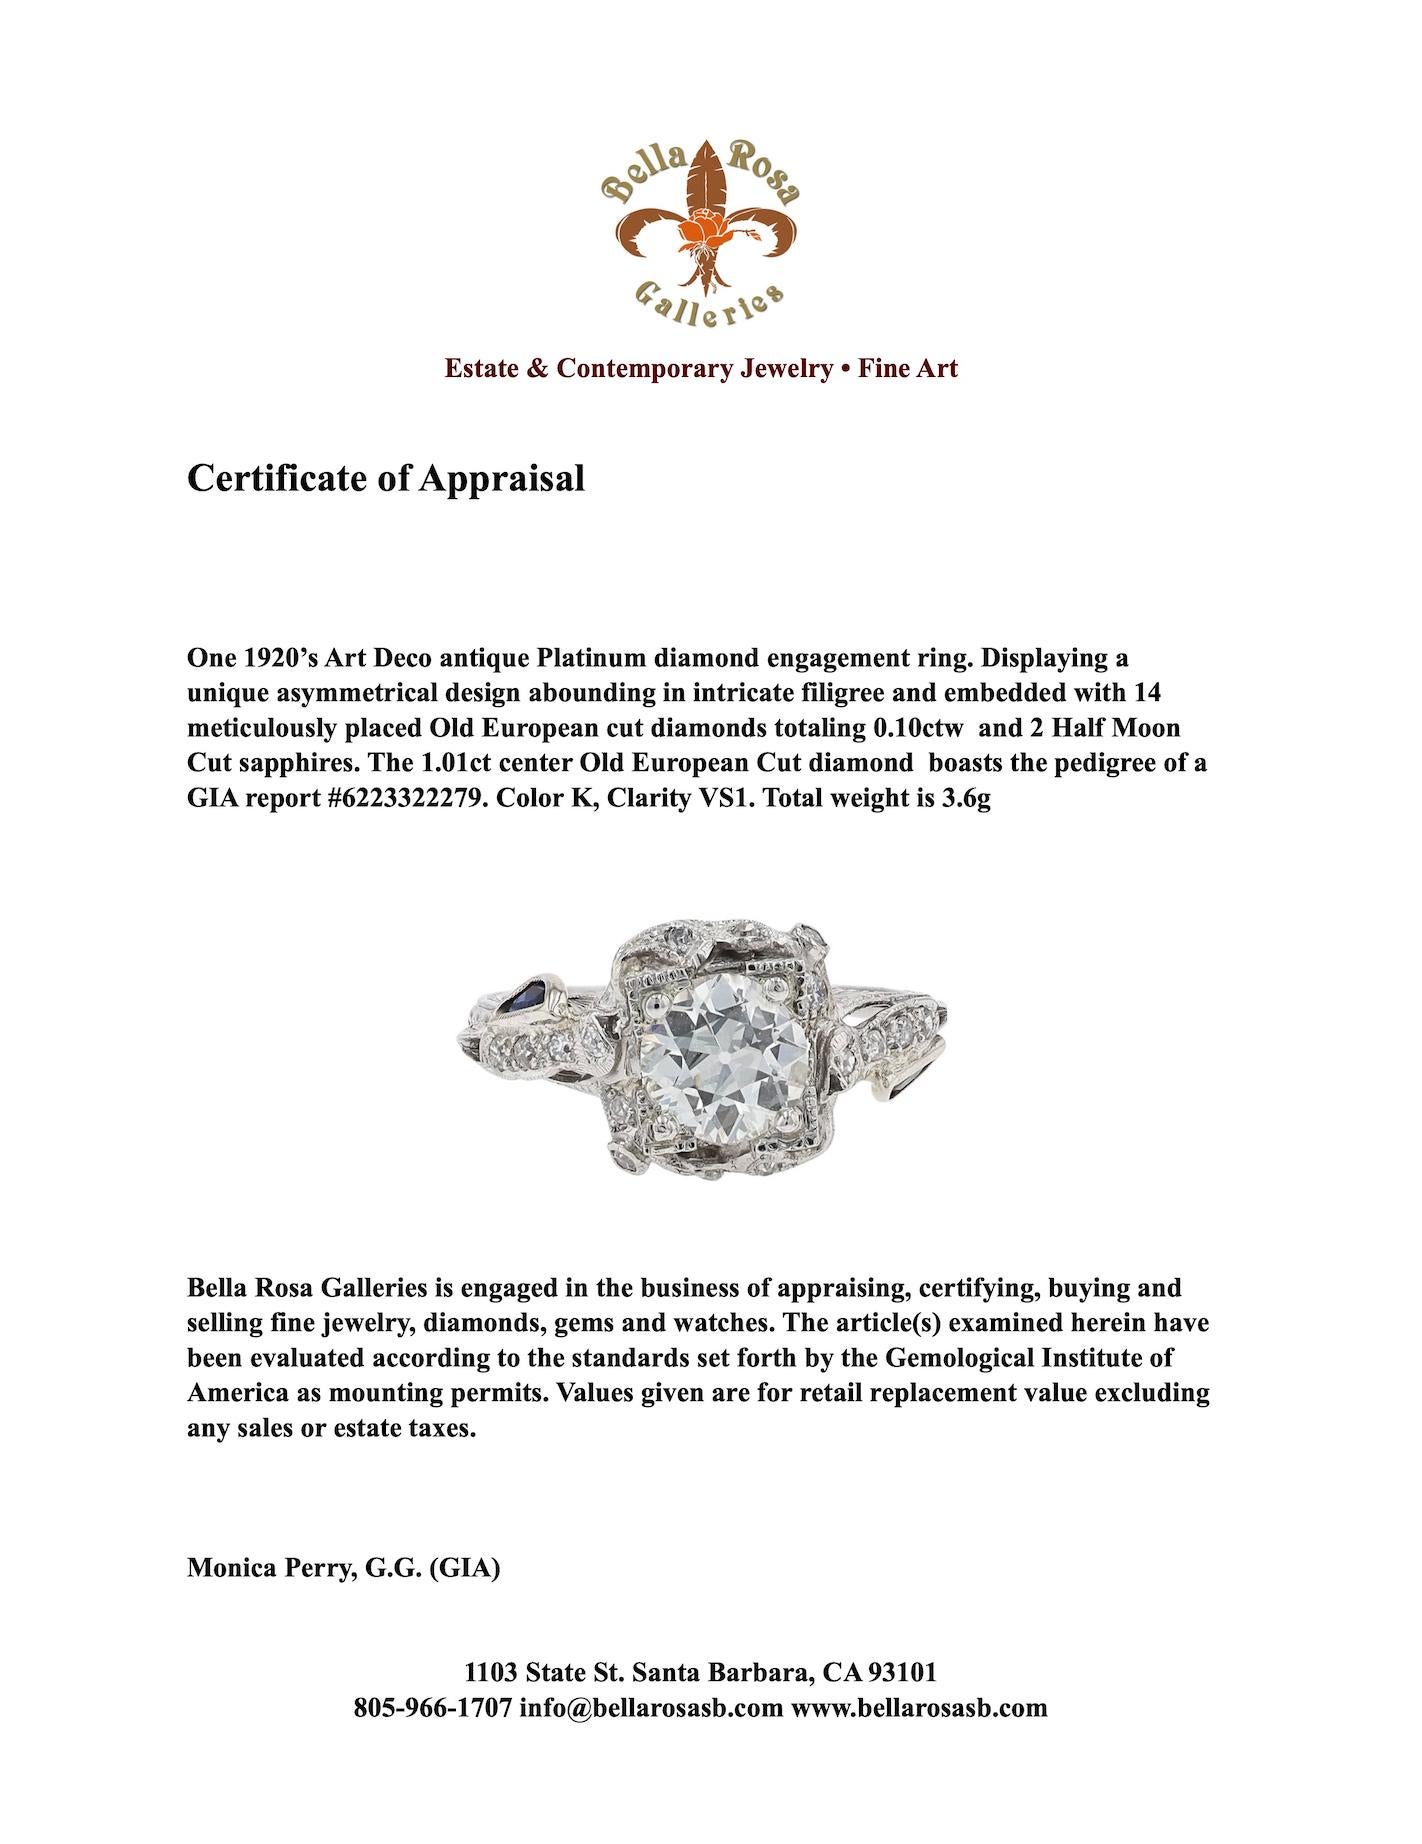 GIA Certified Asymmetrical Art Deco Antique Diamond Engagement Ring For Sale 2